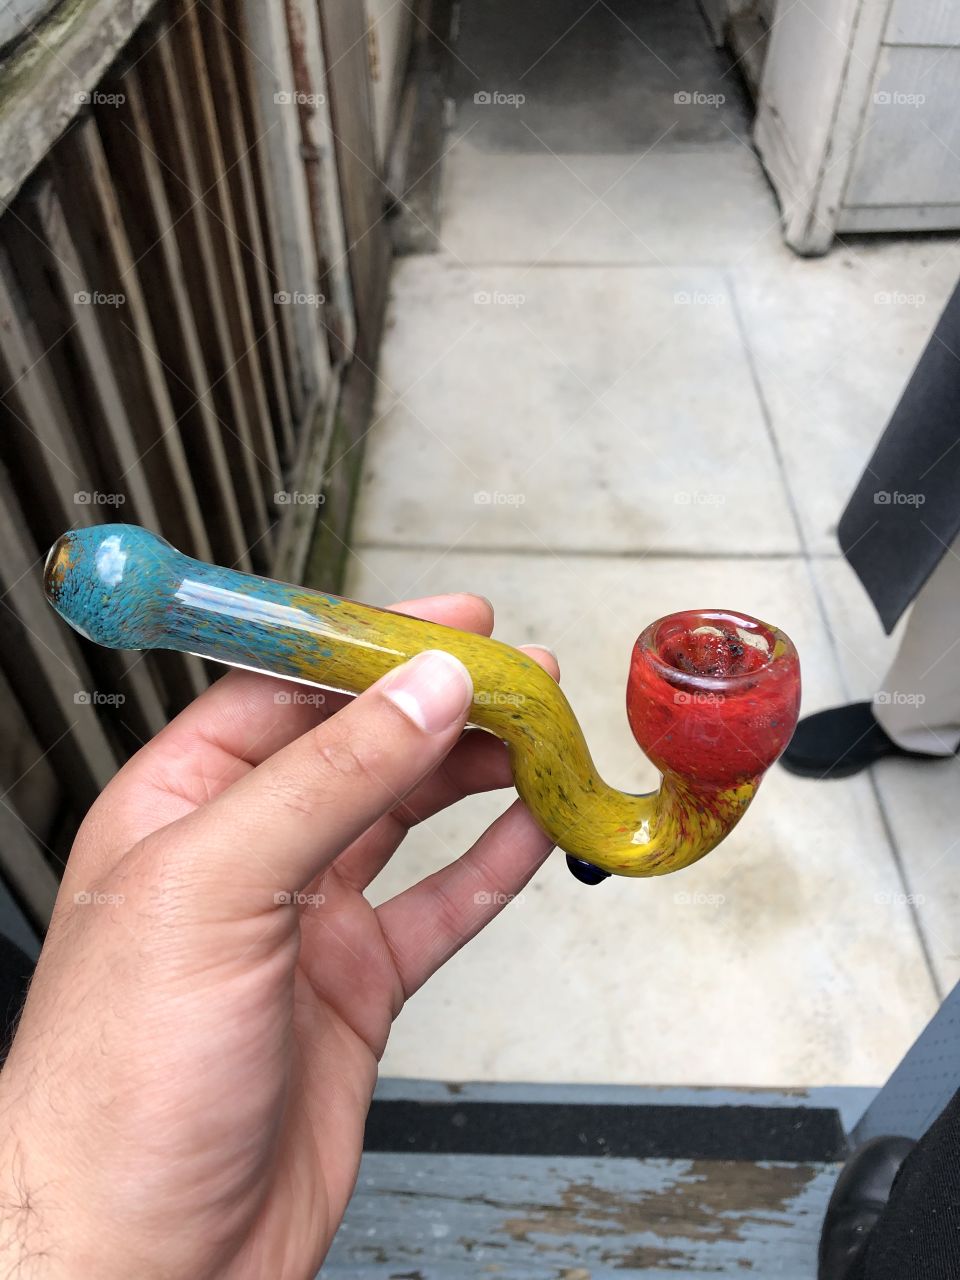 Weed Pipe